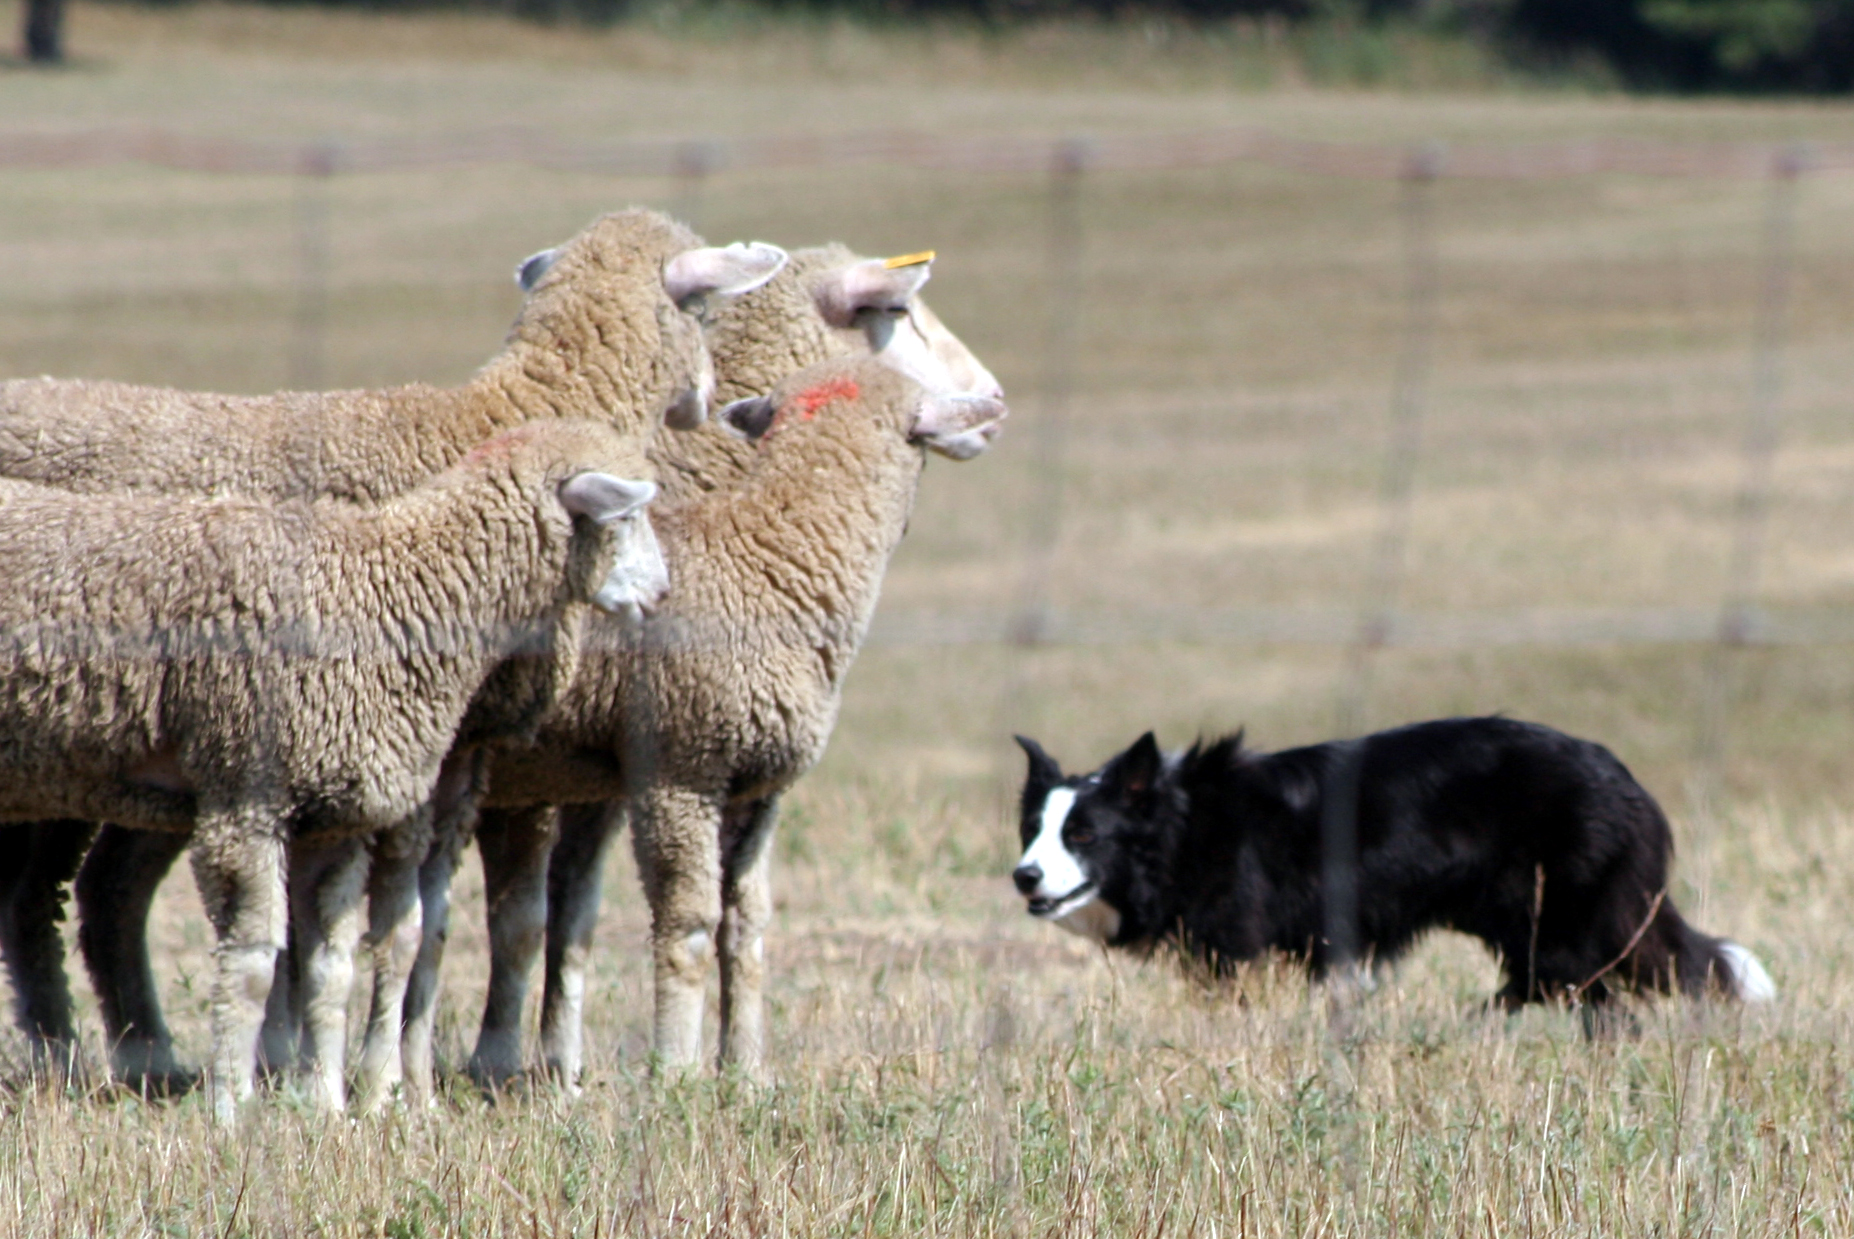 A black and white border collie herds a flock of sheep. Photo by C. MacMillan